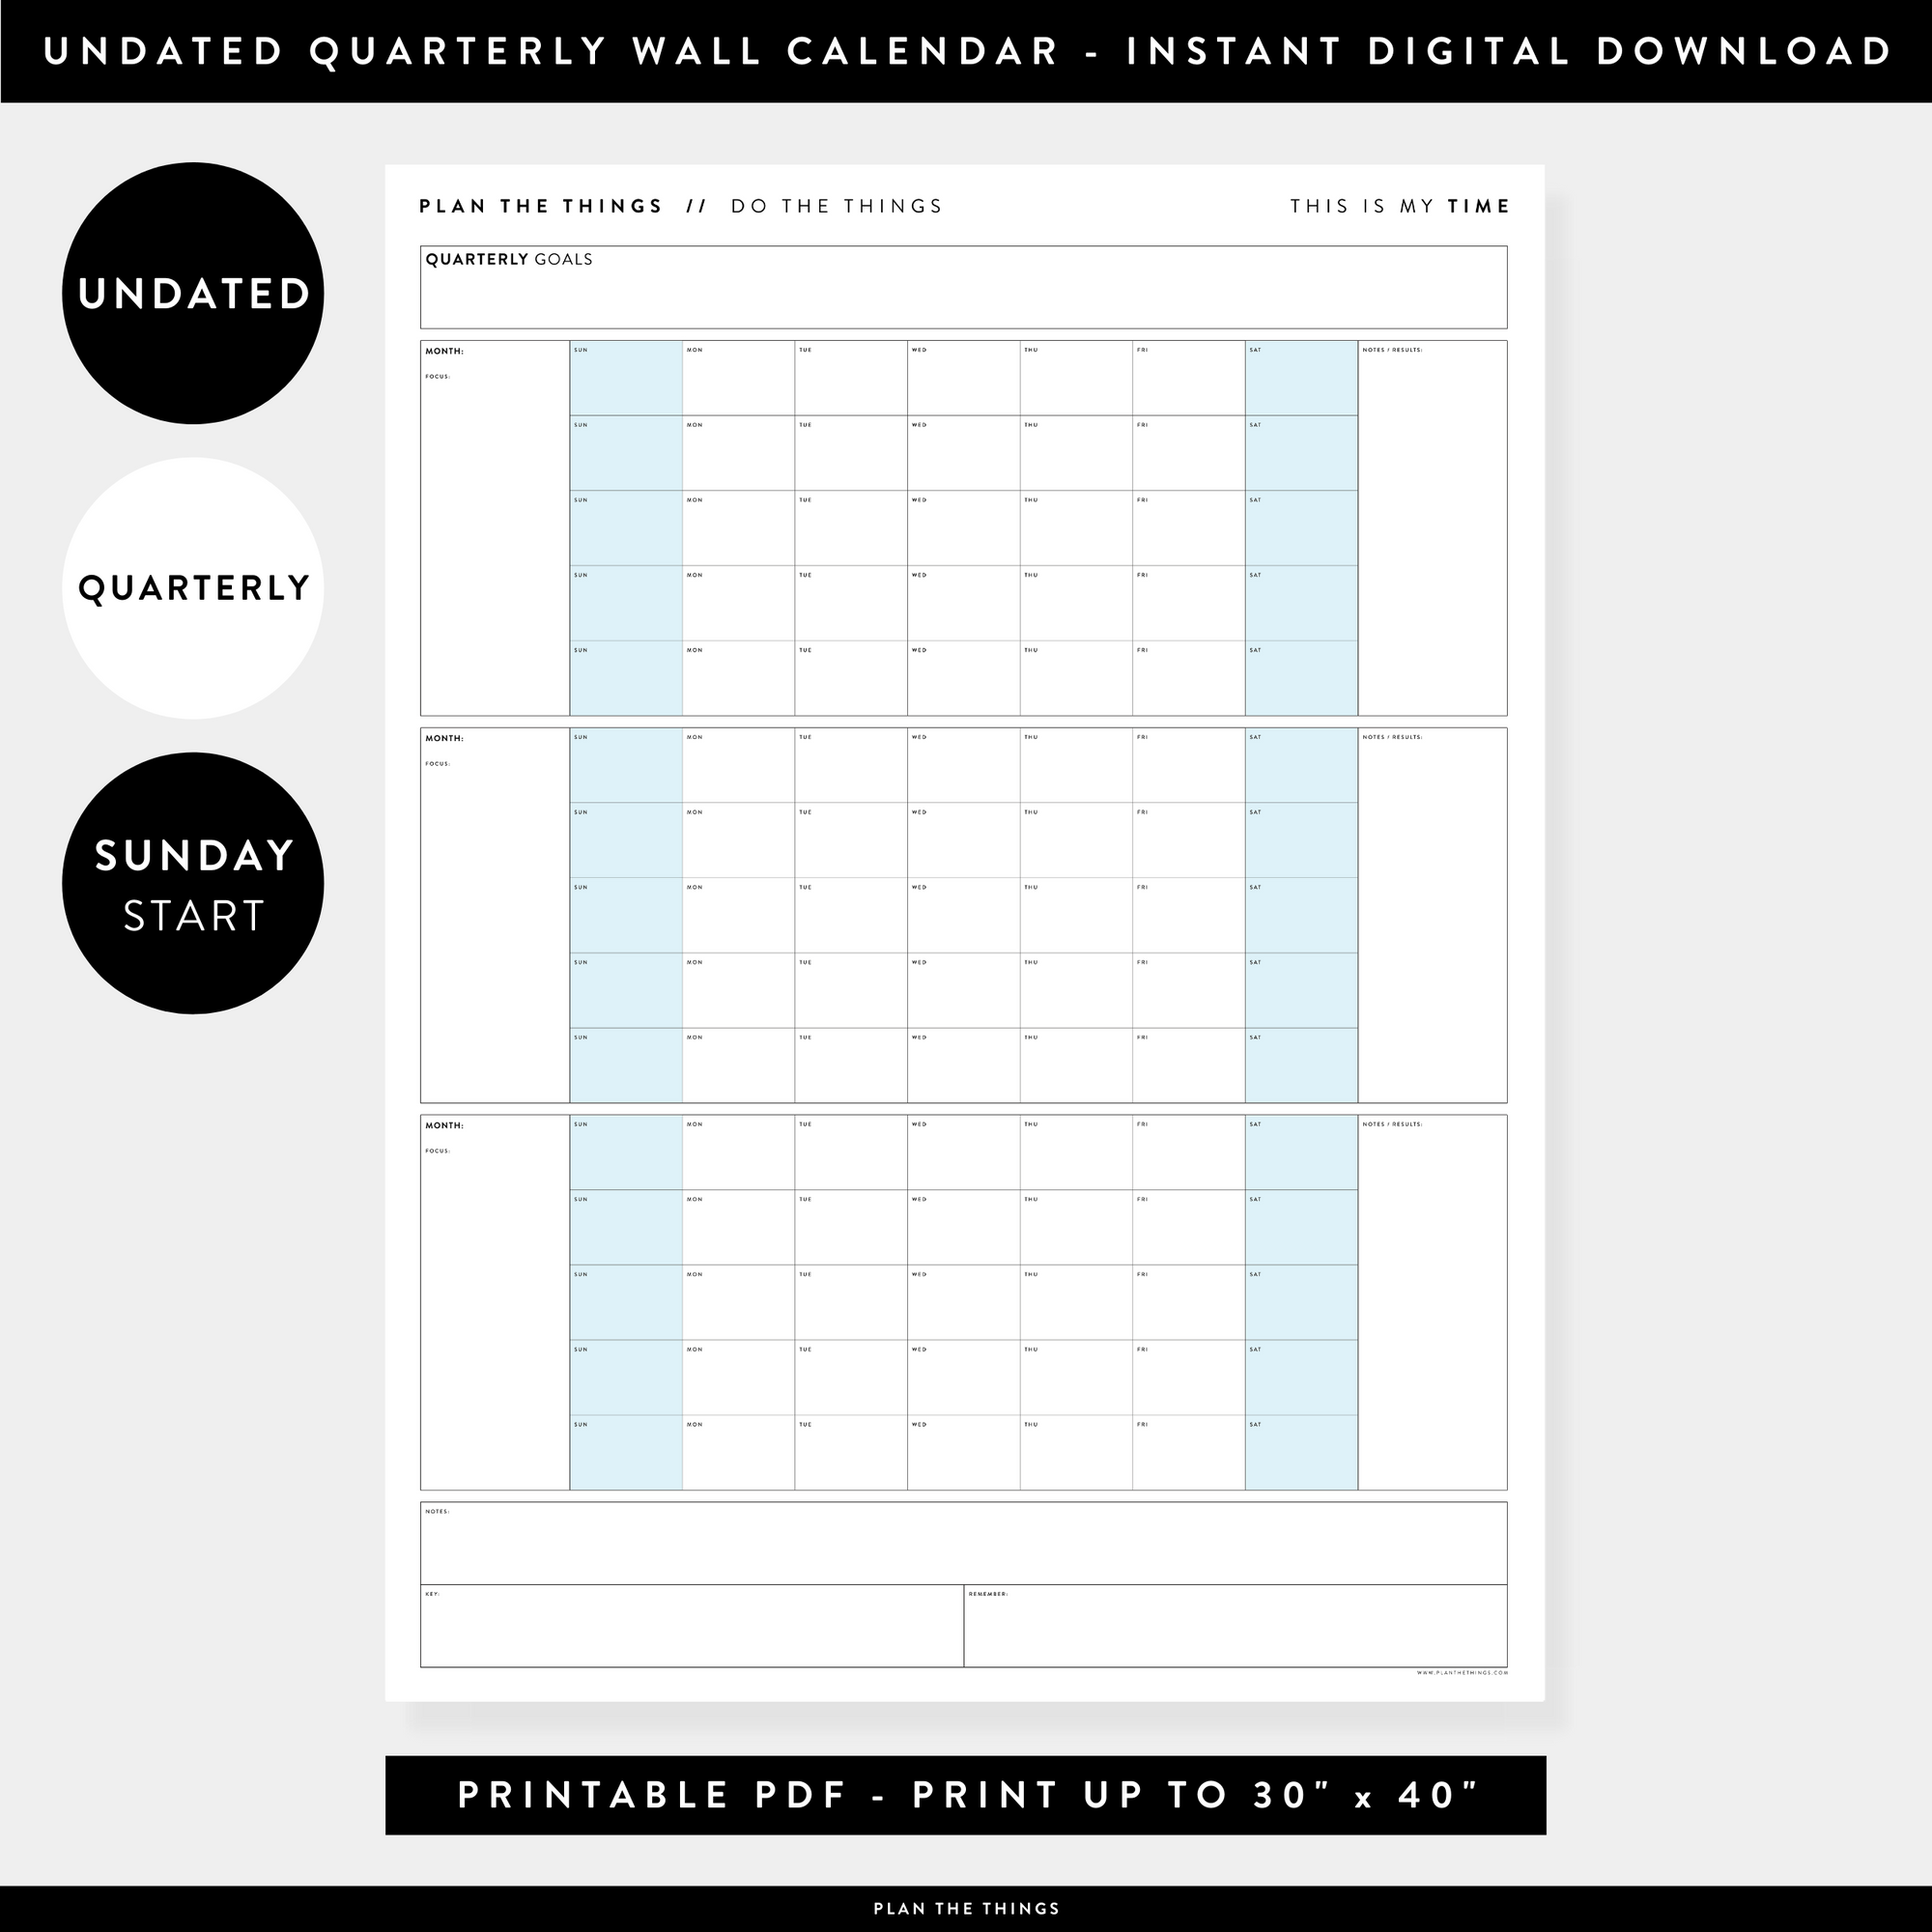 PRINTABLE UNDATED QUARTERLY WALL CALENDAR - SUNDAY START - BLUE WEEKENDS - INSTANT DOWNLOAD